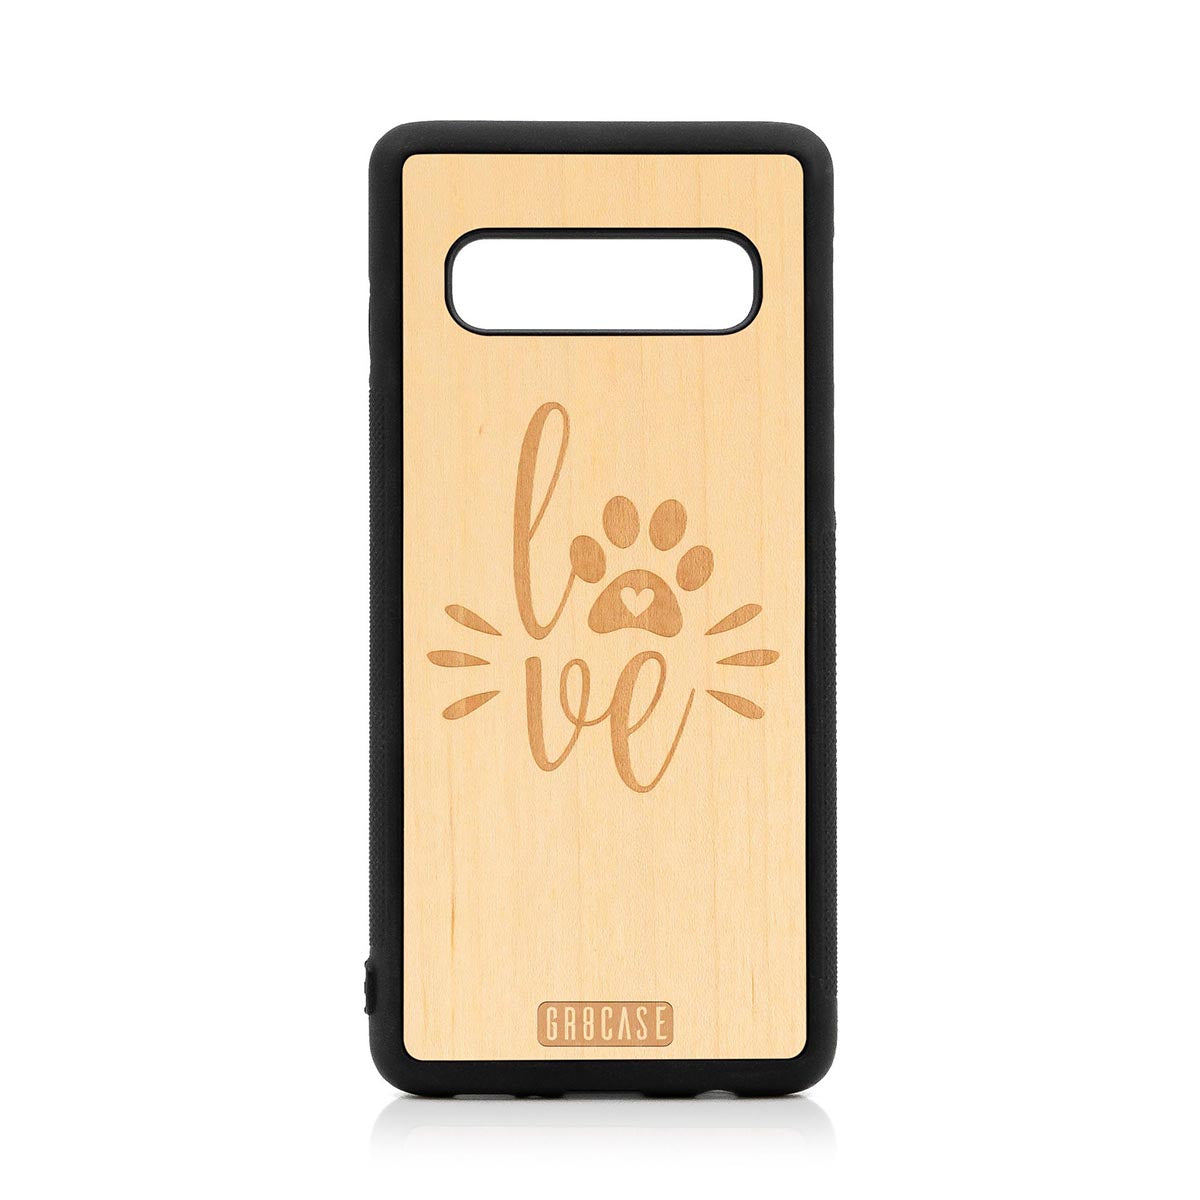 Paw Love Design Wood Case For Samsung Galaxy S10 by GR8CASE